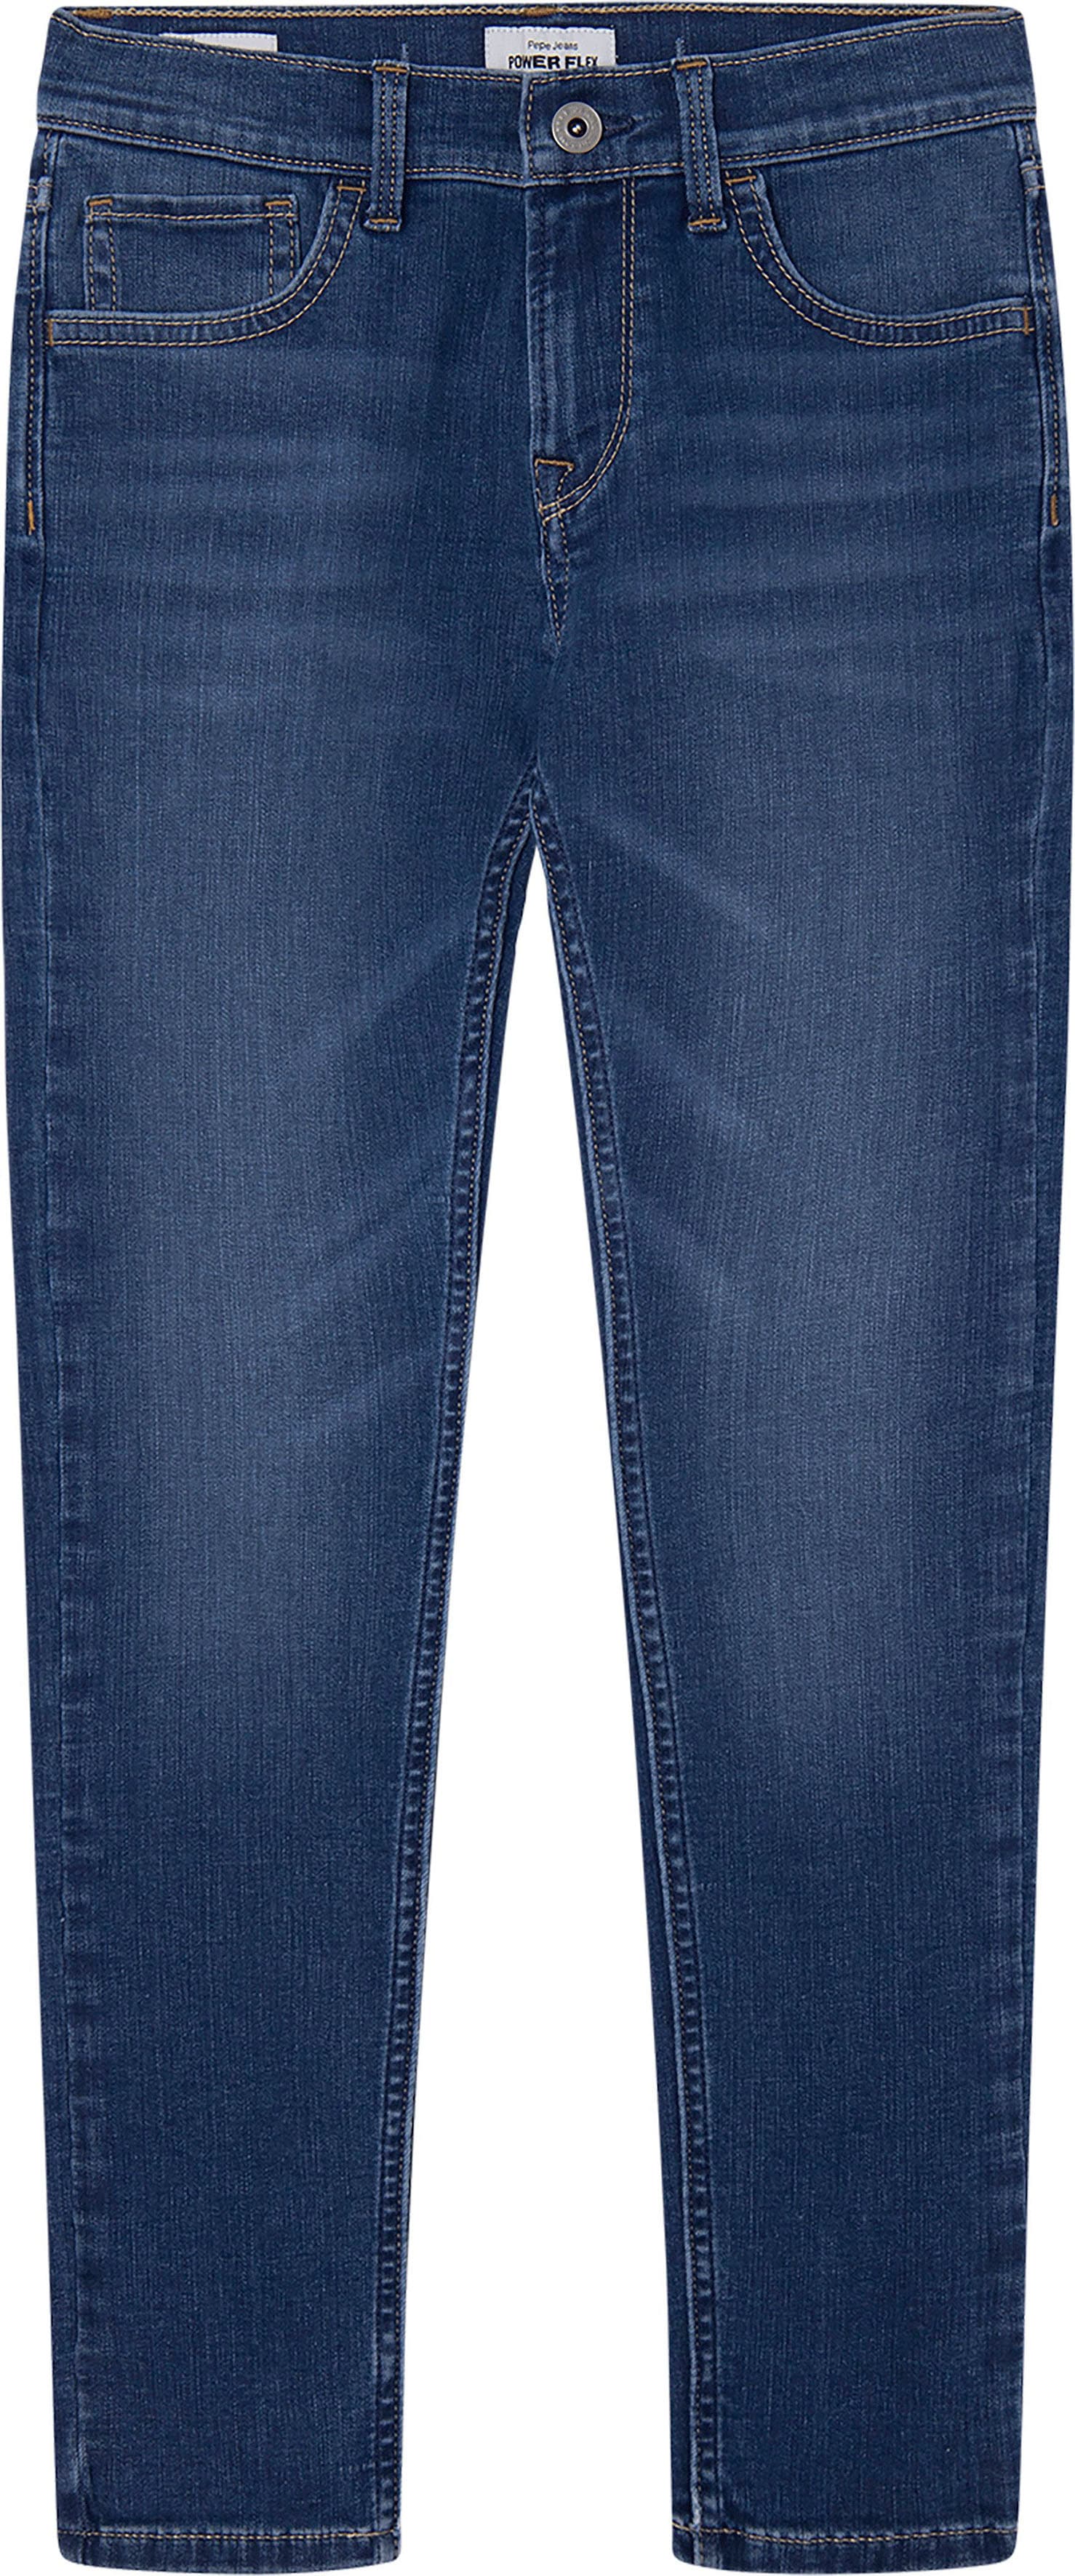 Pepe Jeans 5-Pocket-Jeans »Teo« von Pepe Jeans